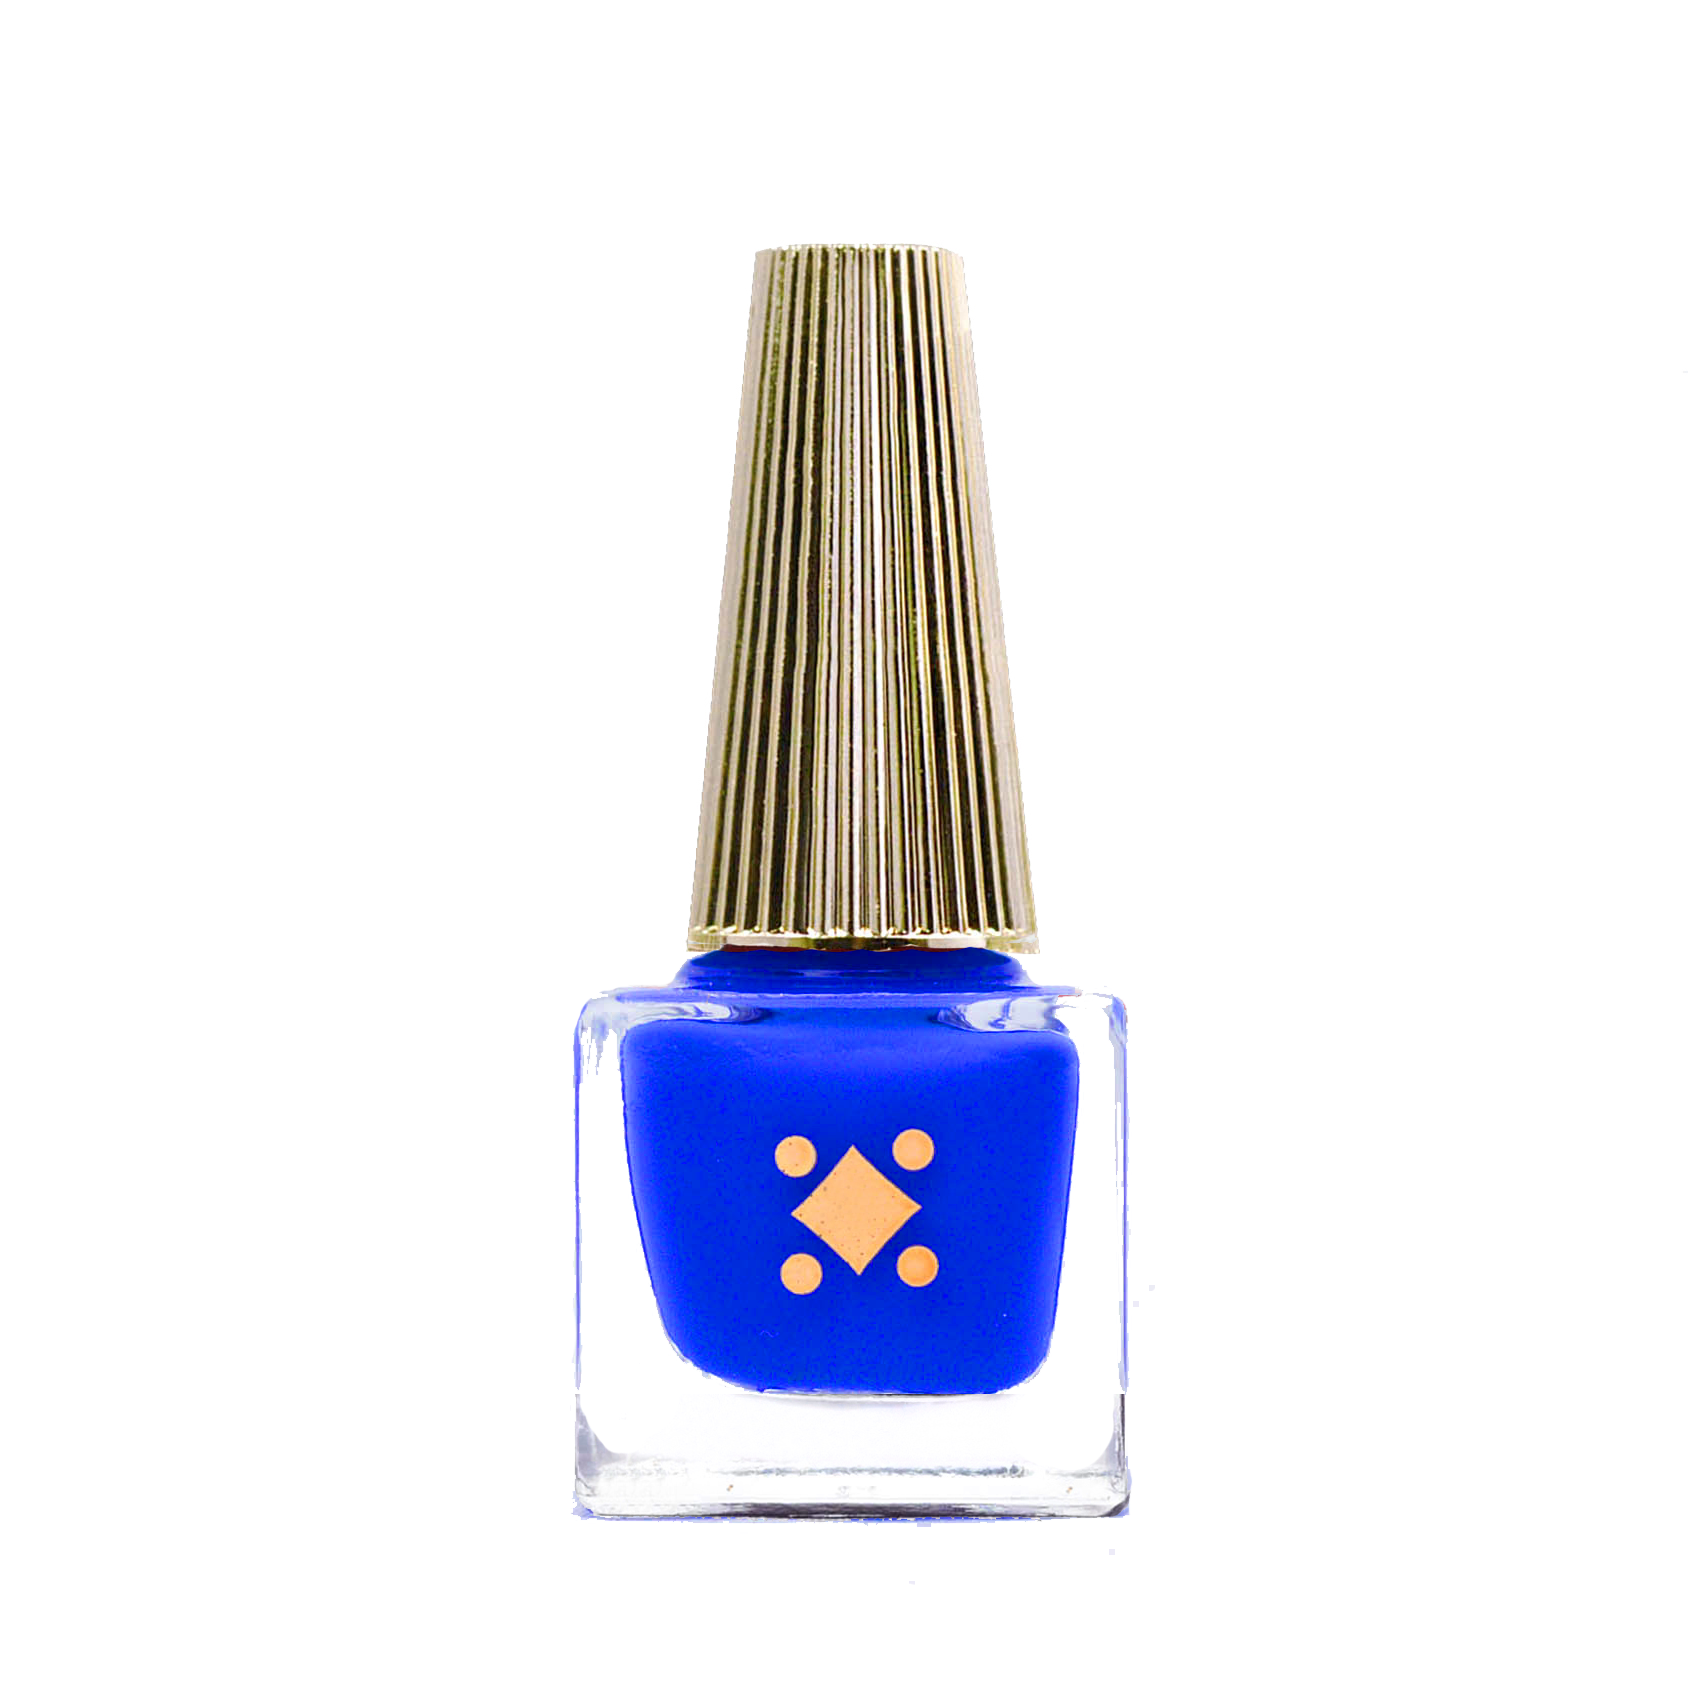 NAMASTE BY THE POOL - 6ML - royal blue crème nail lacquer by Deco Miami